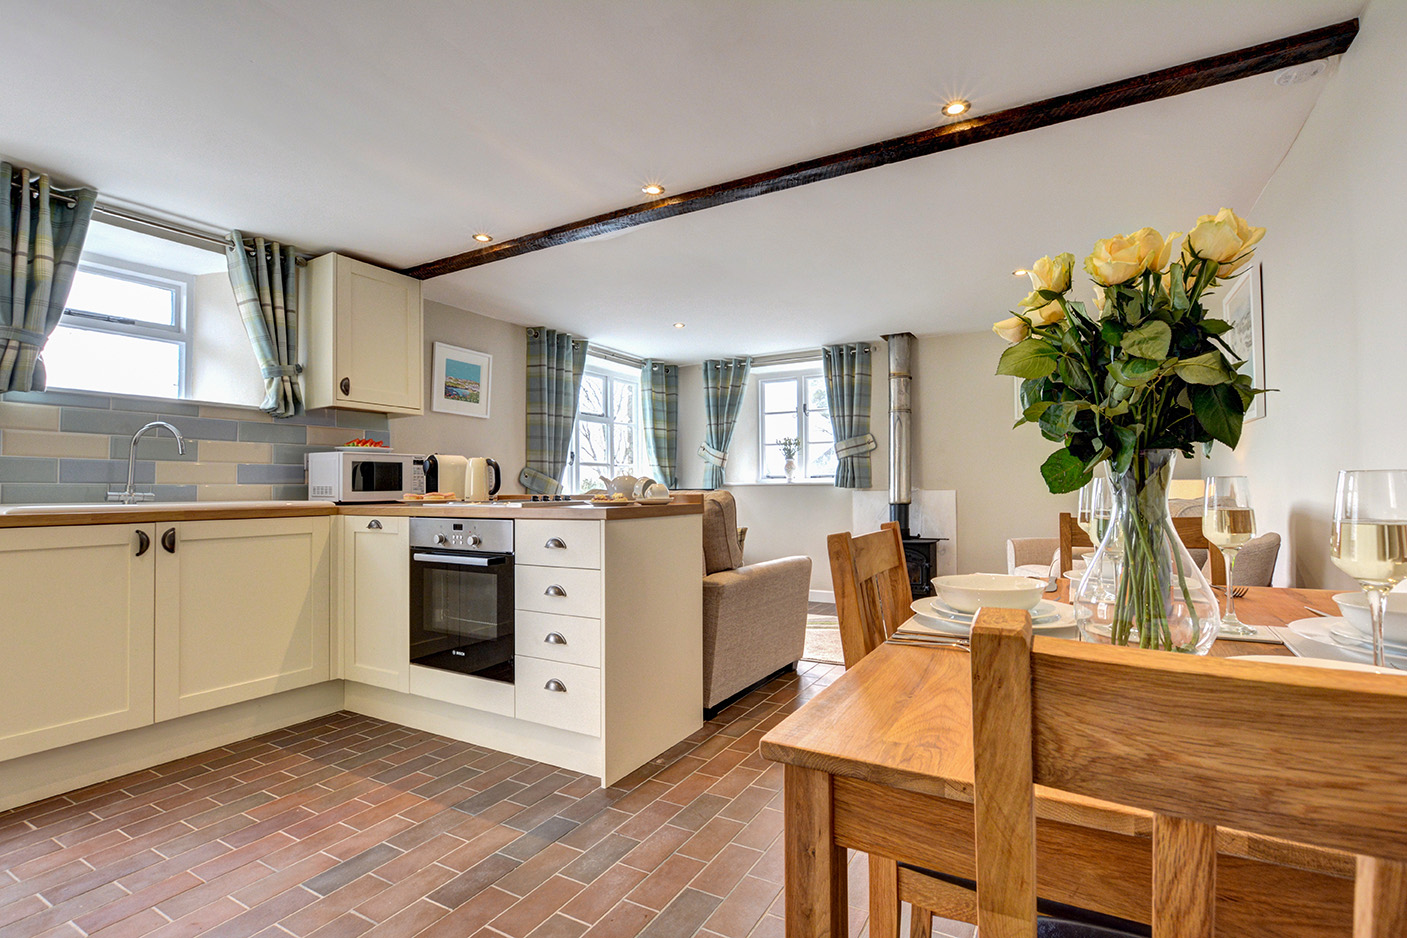 The dining area and kitchen of Butterwell luxury self catering converted barn holiday cottage at Penrose Burden in North Cornwall 01.jpg